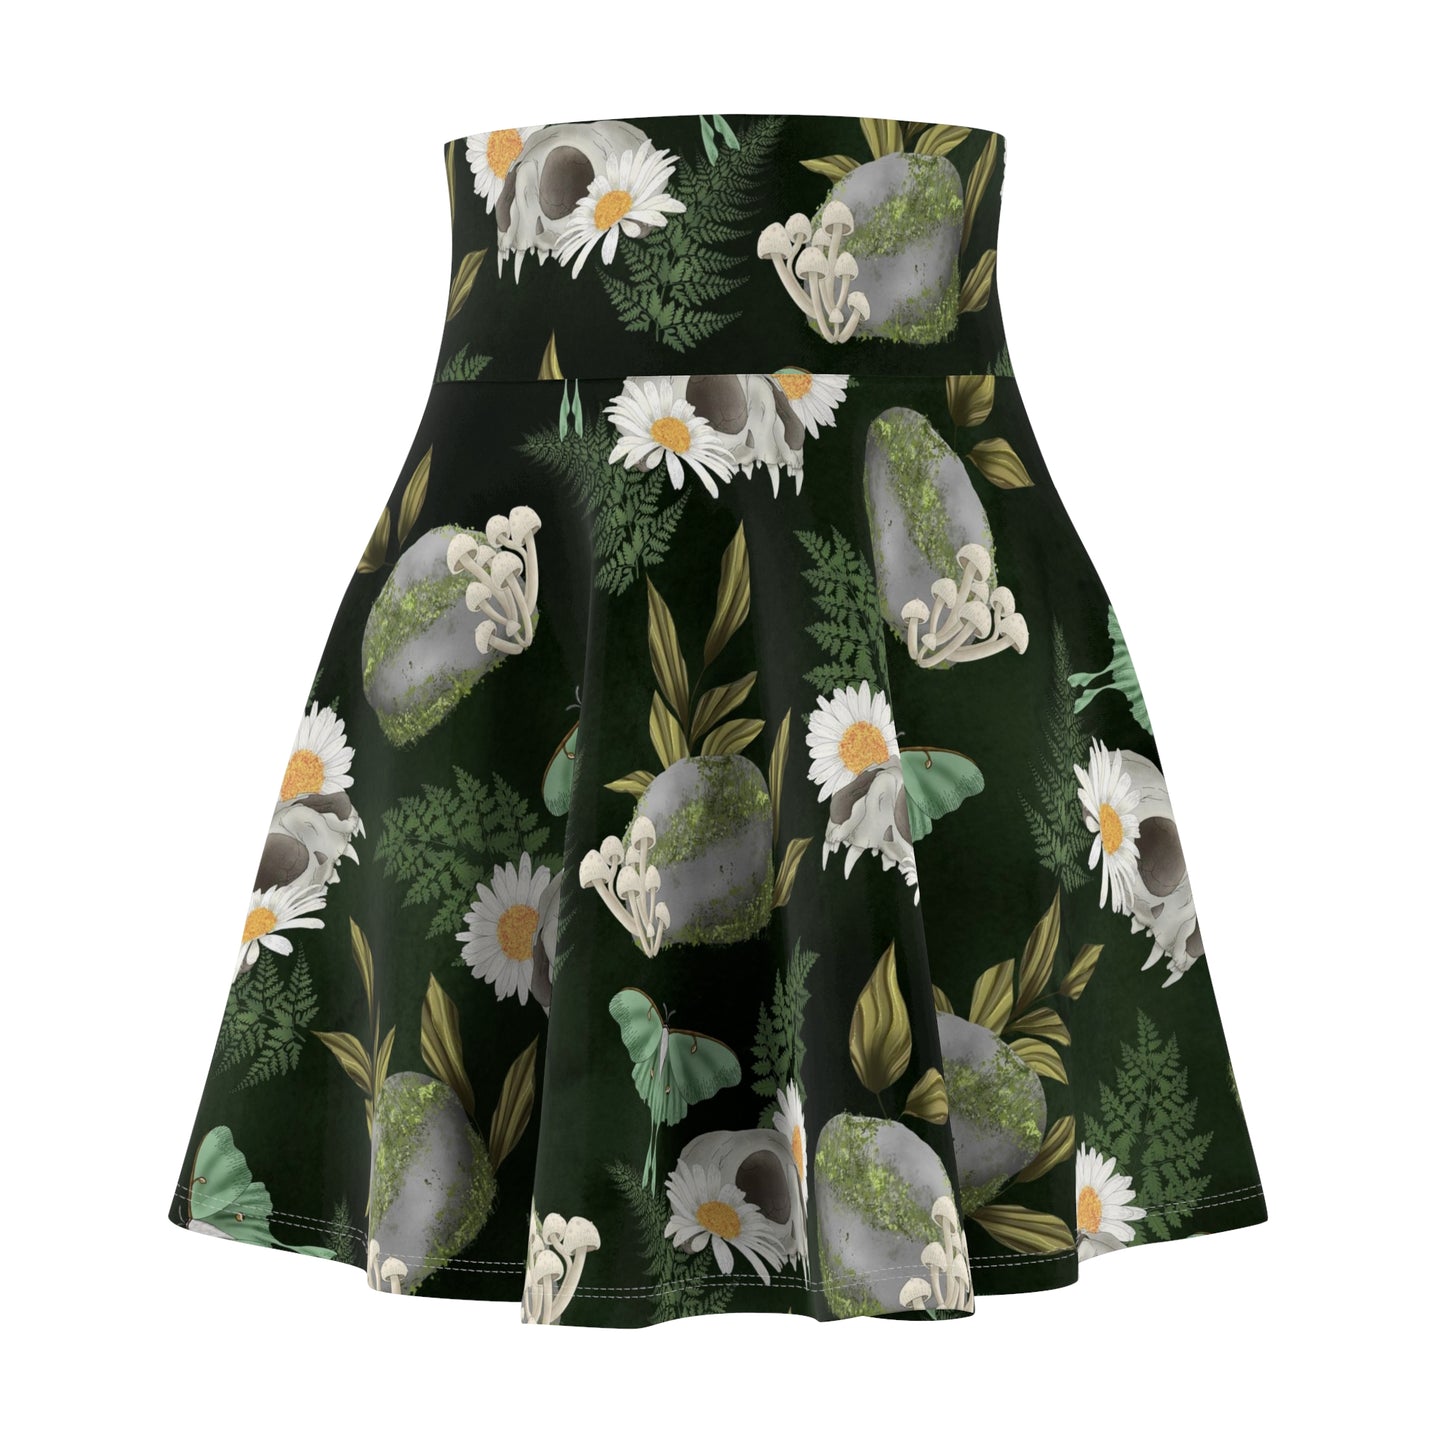 Skulls & Plants Green Witch | Witchy Skirt | Magical Skirt | Yellow & Orange